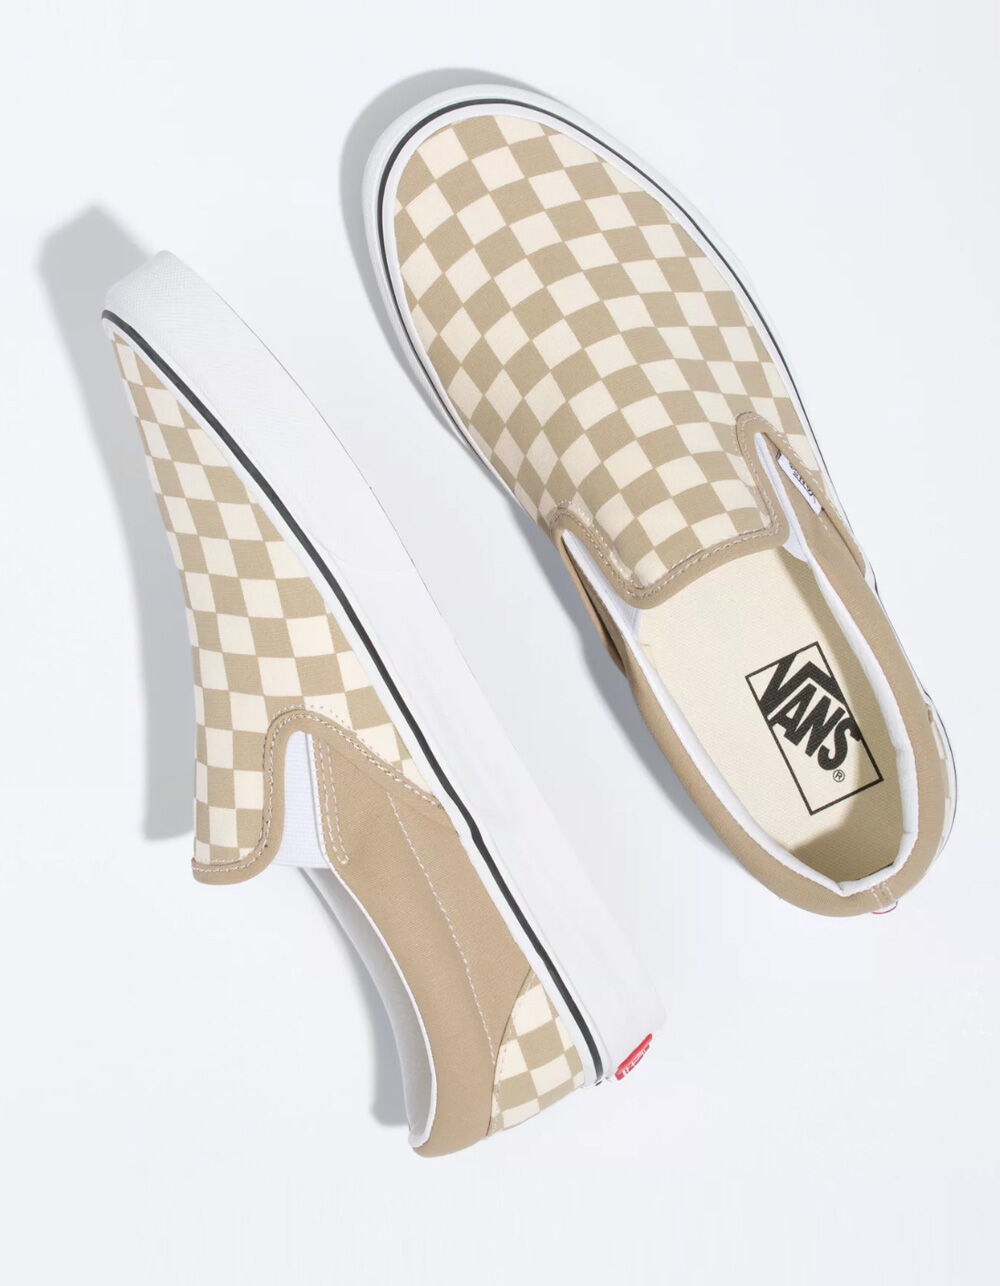 VANS Checkerboard Classic Slip-On Incense & True White Shoes - INCENSE ...